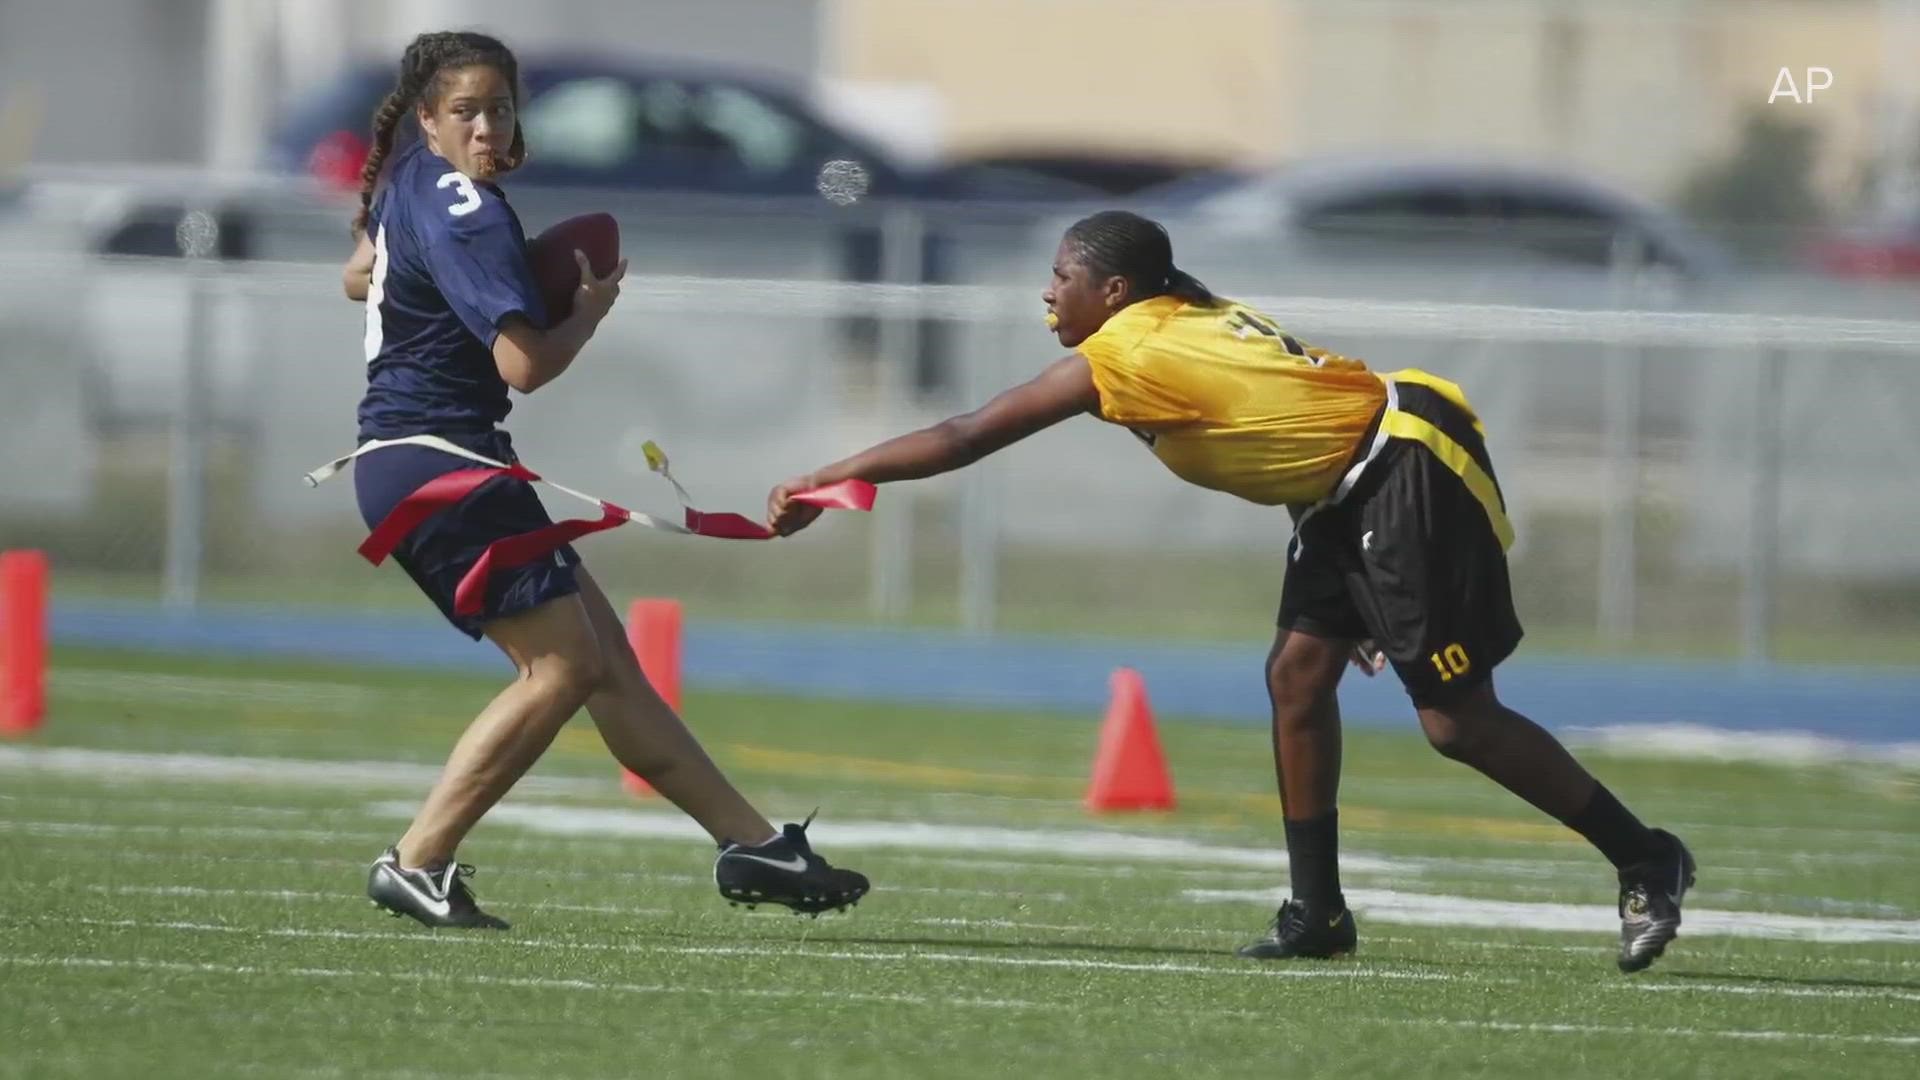 The California Interscholastic Federation's federated council voted Friday to make flag football an official high school sport for girls.